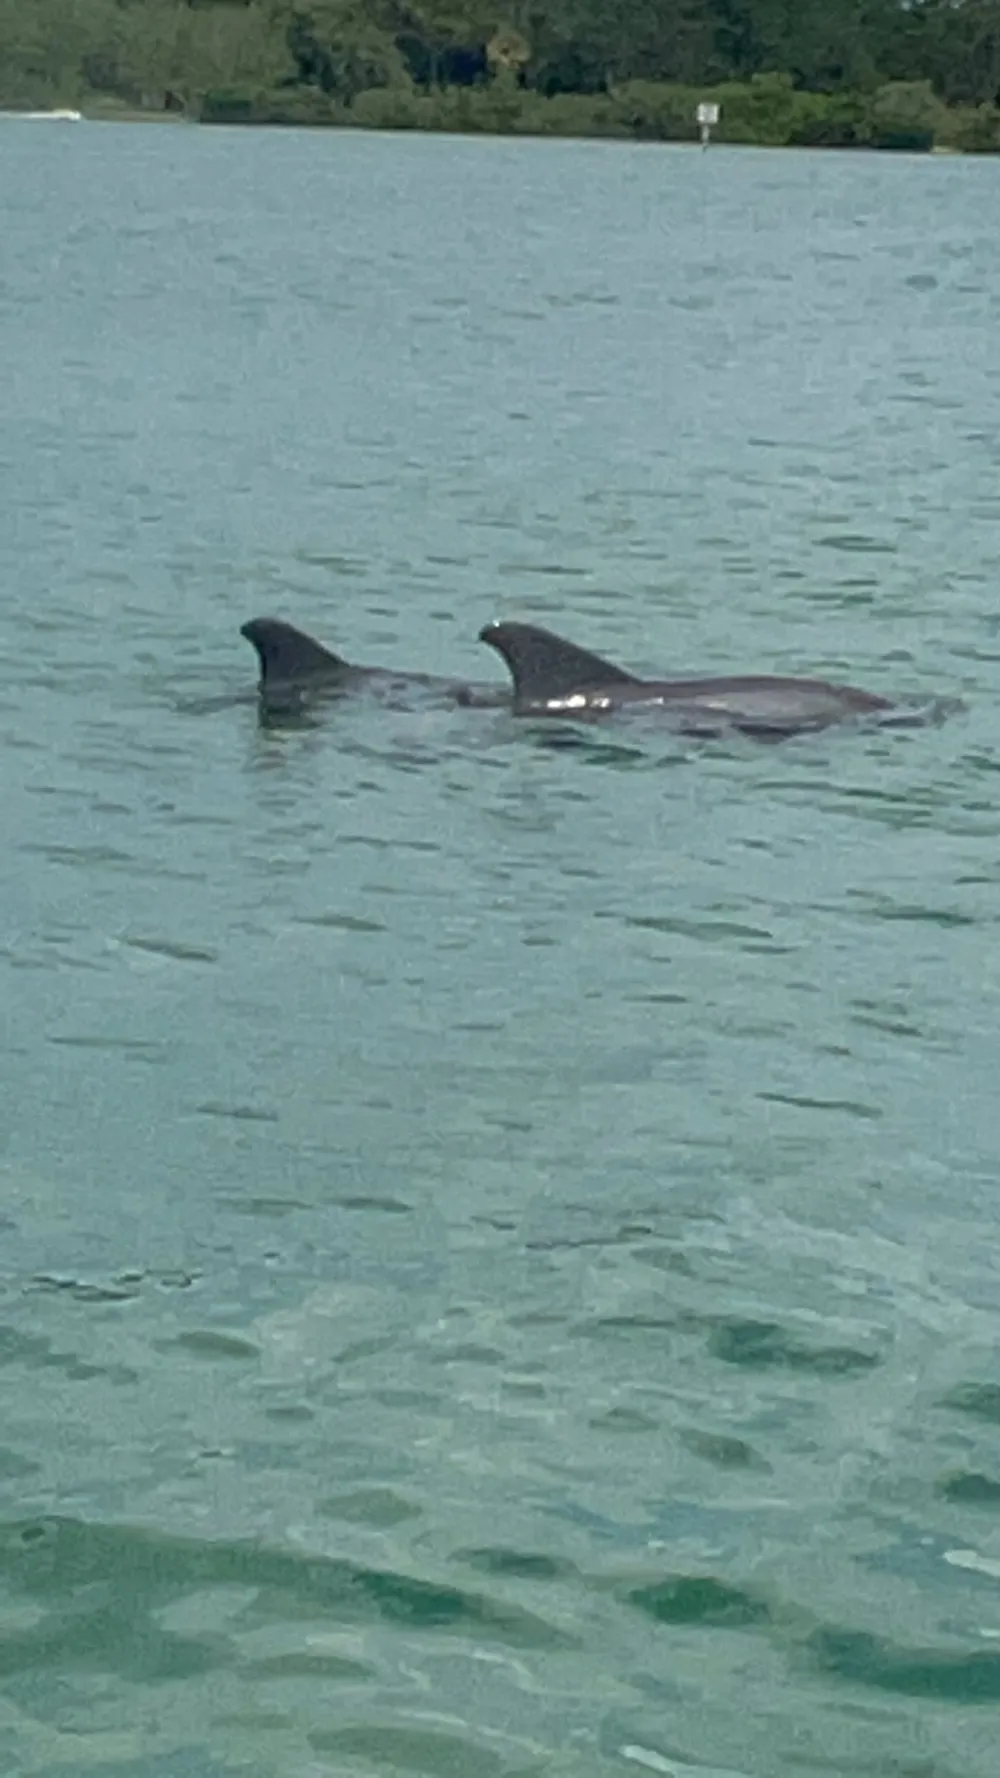 The image shows two dolphins swimming near the surface of a body of water with foliage visible in the background